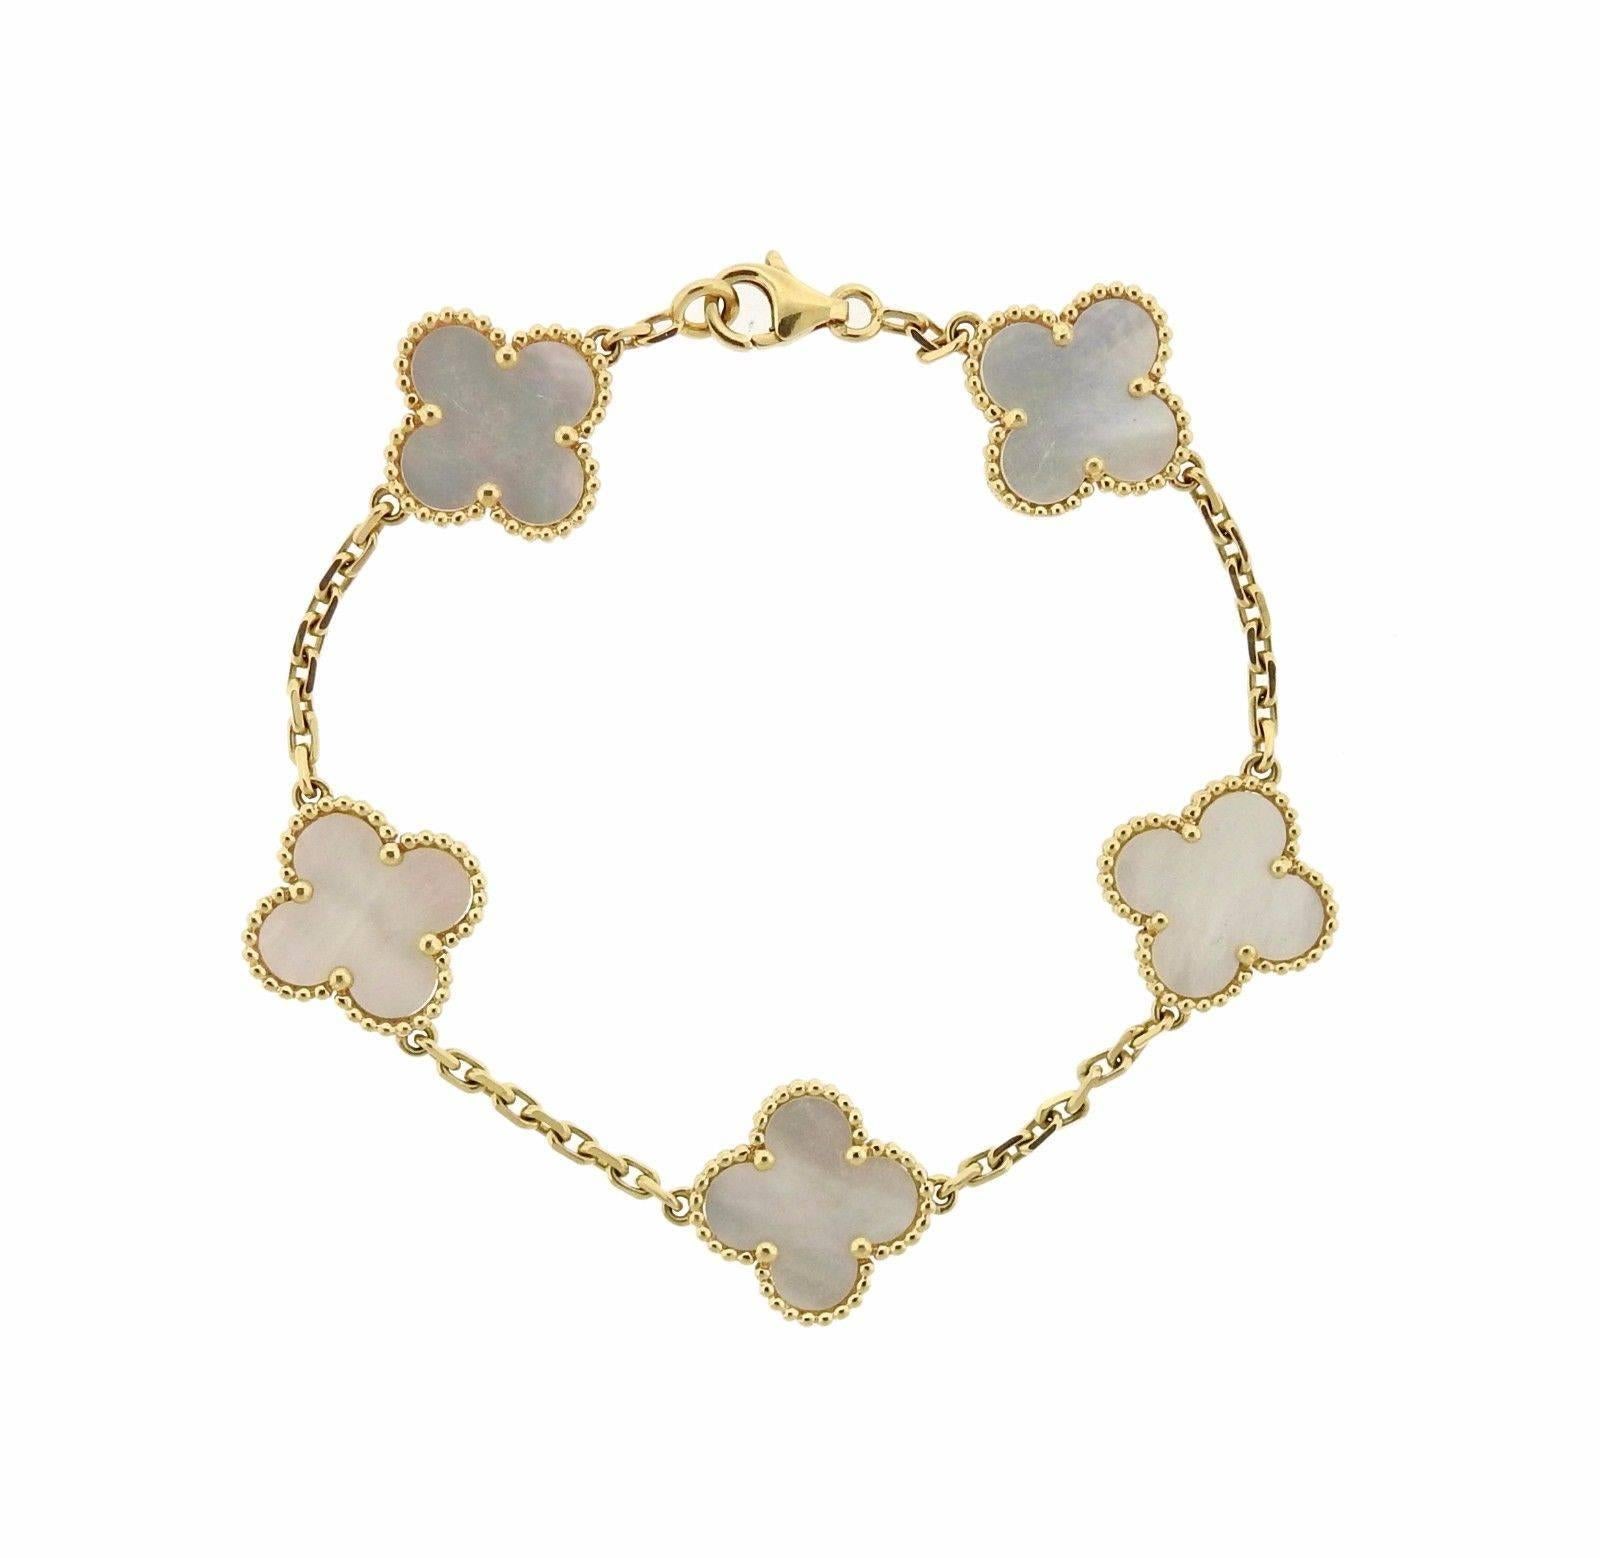 An 18k gold bracelet set with mother of pearl.  The bracelet is 7